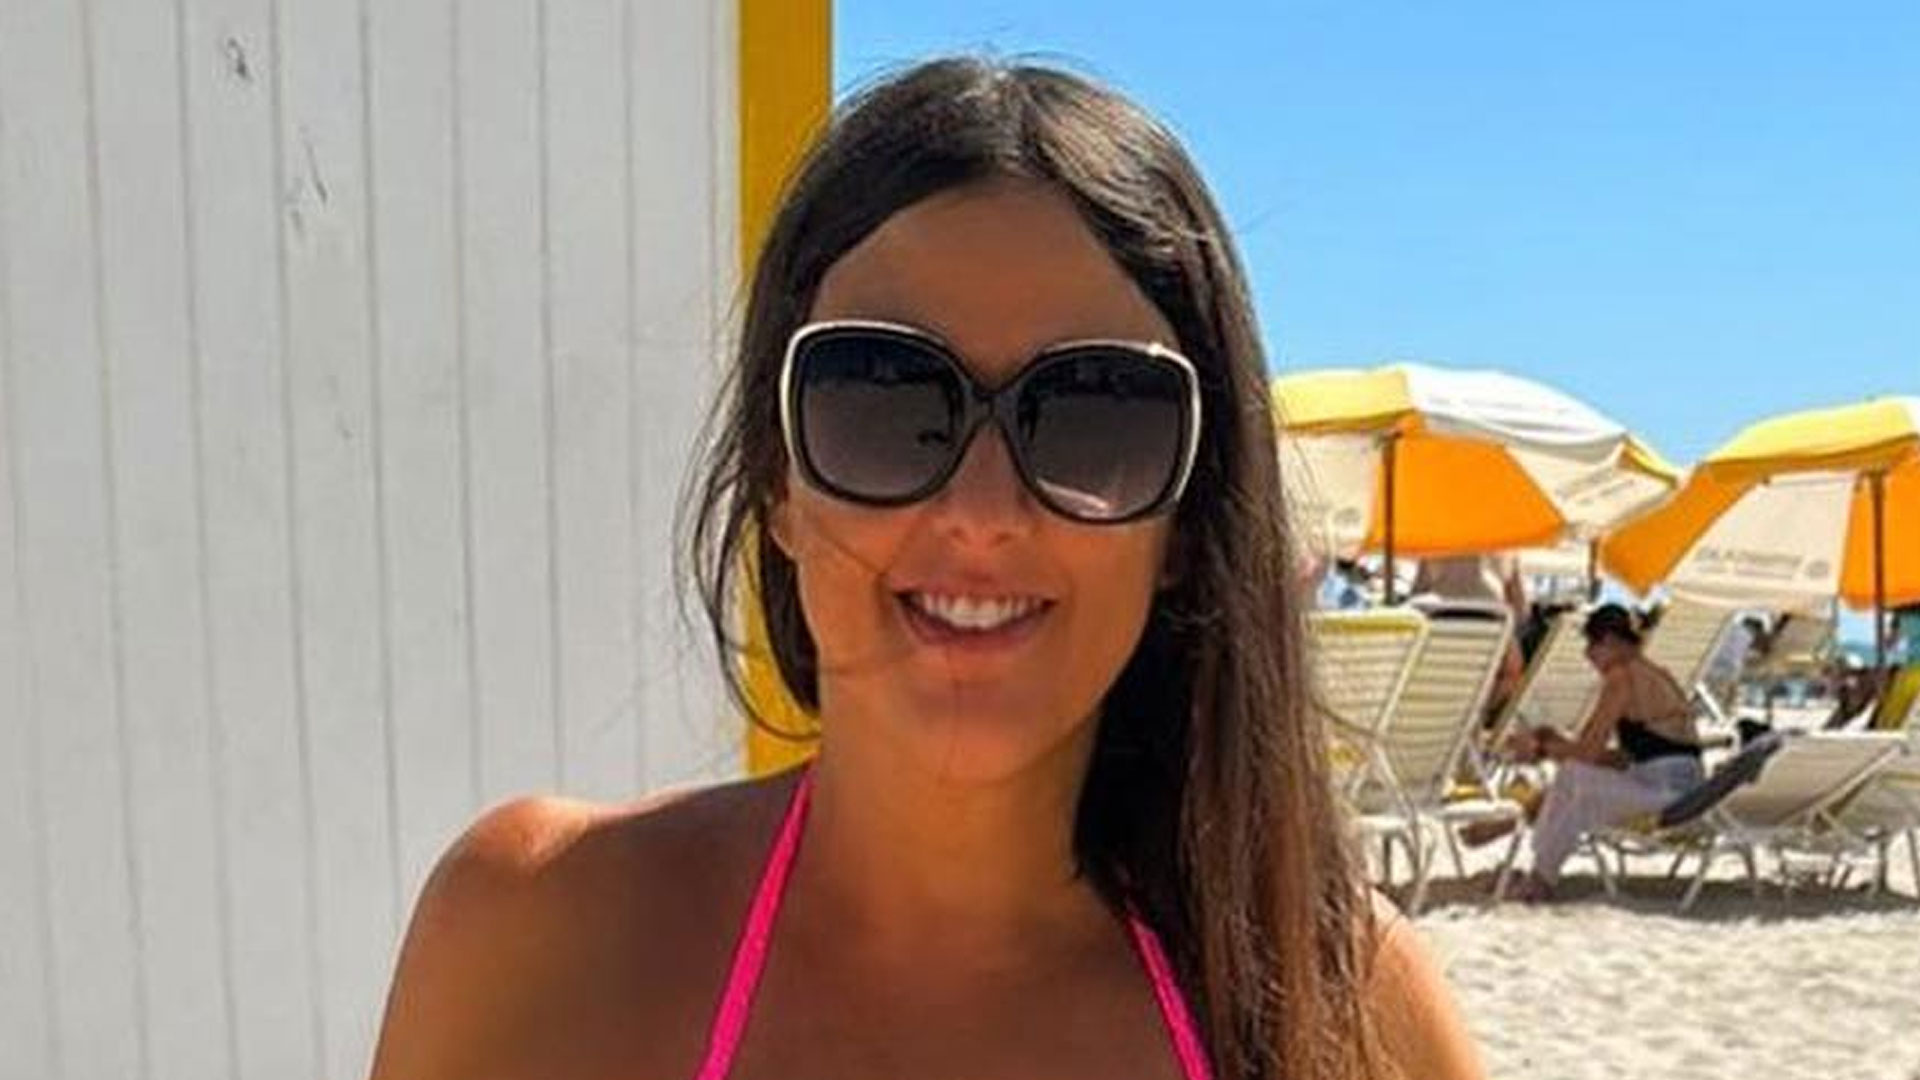 World’s sexiest ref Claudia Romani shows off her bum in stunning bikini as fans call her ‘amazingly sexy’ [Video]